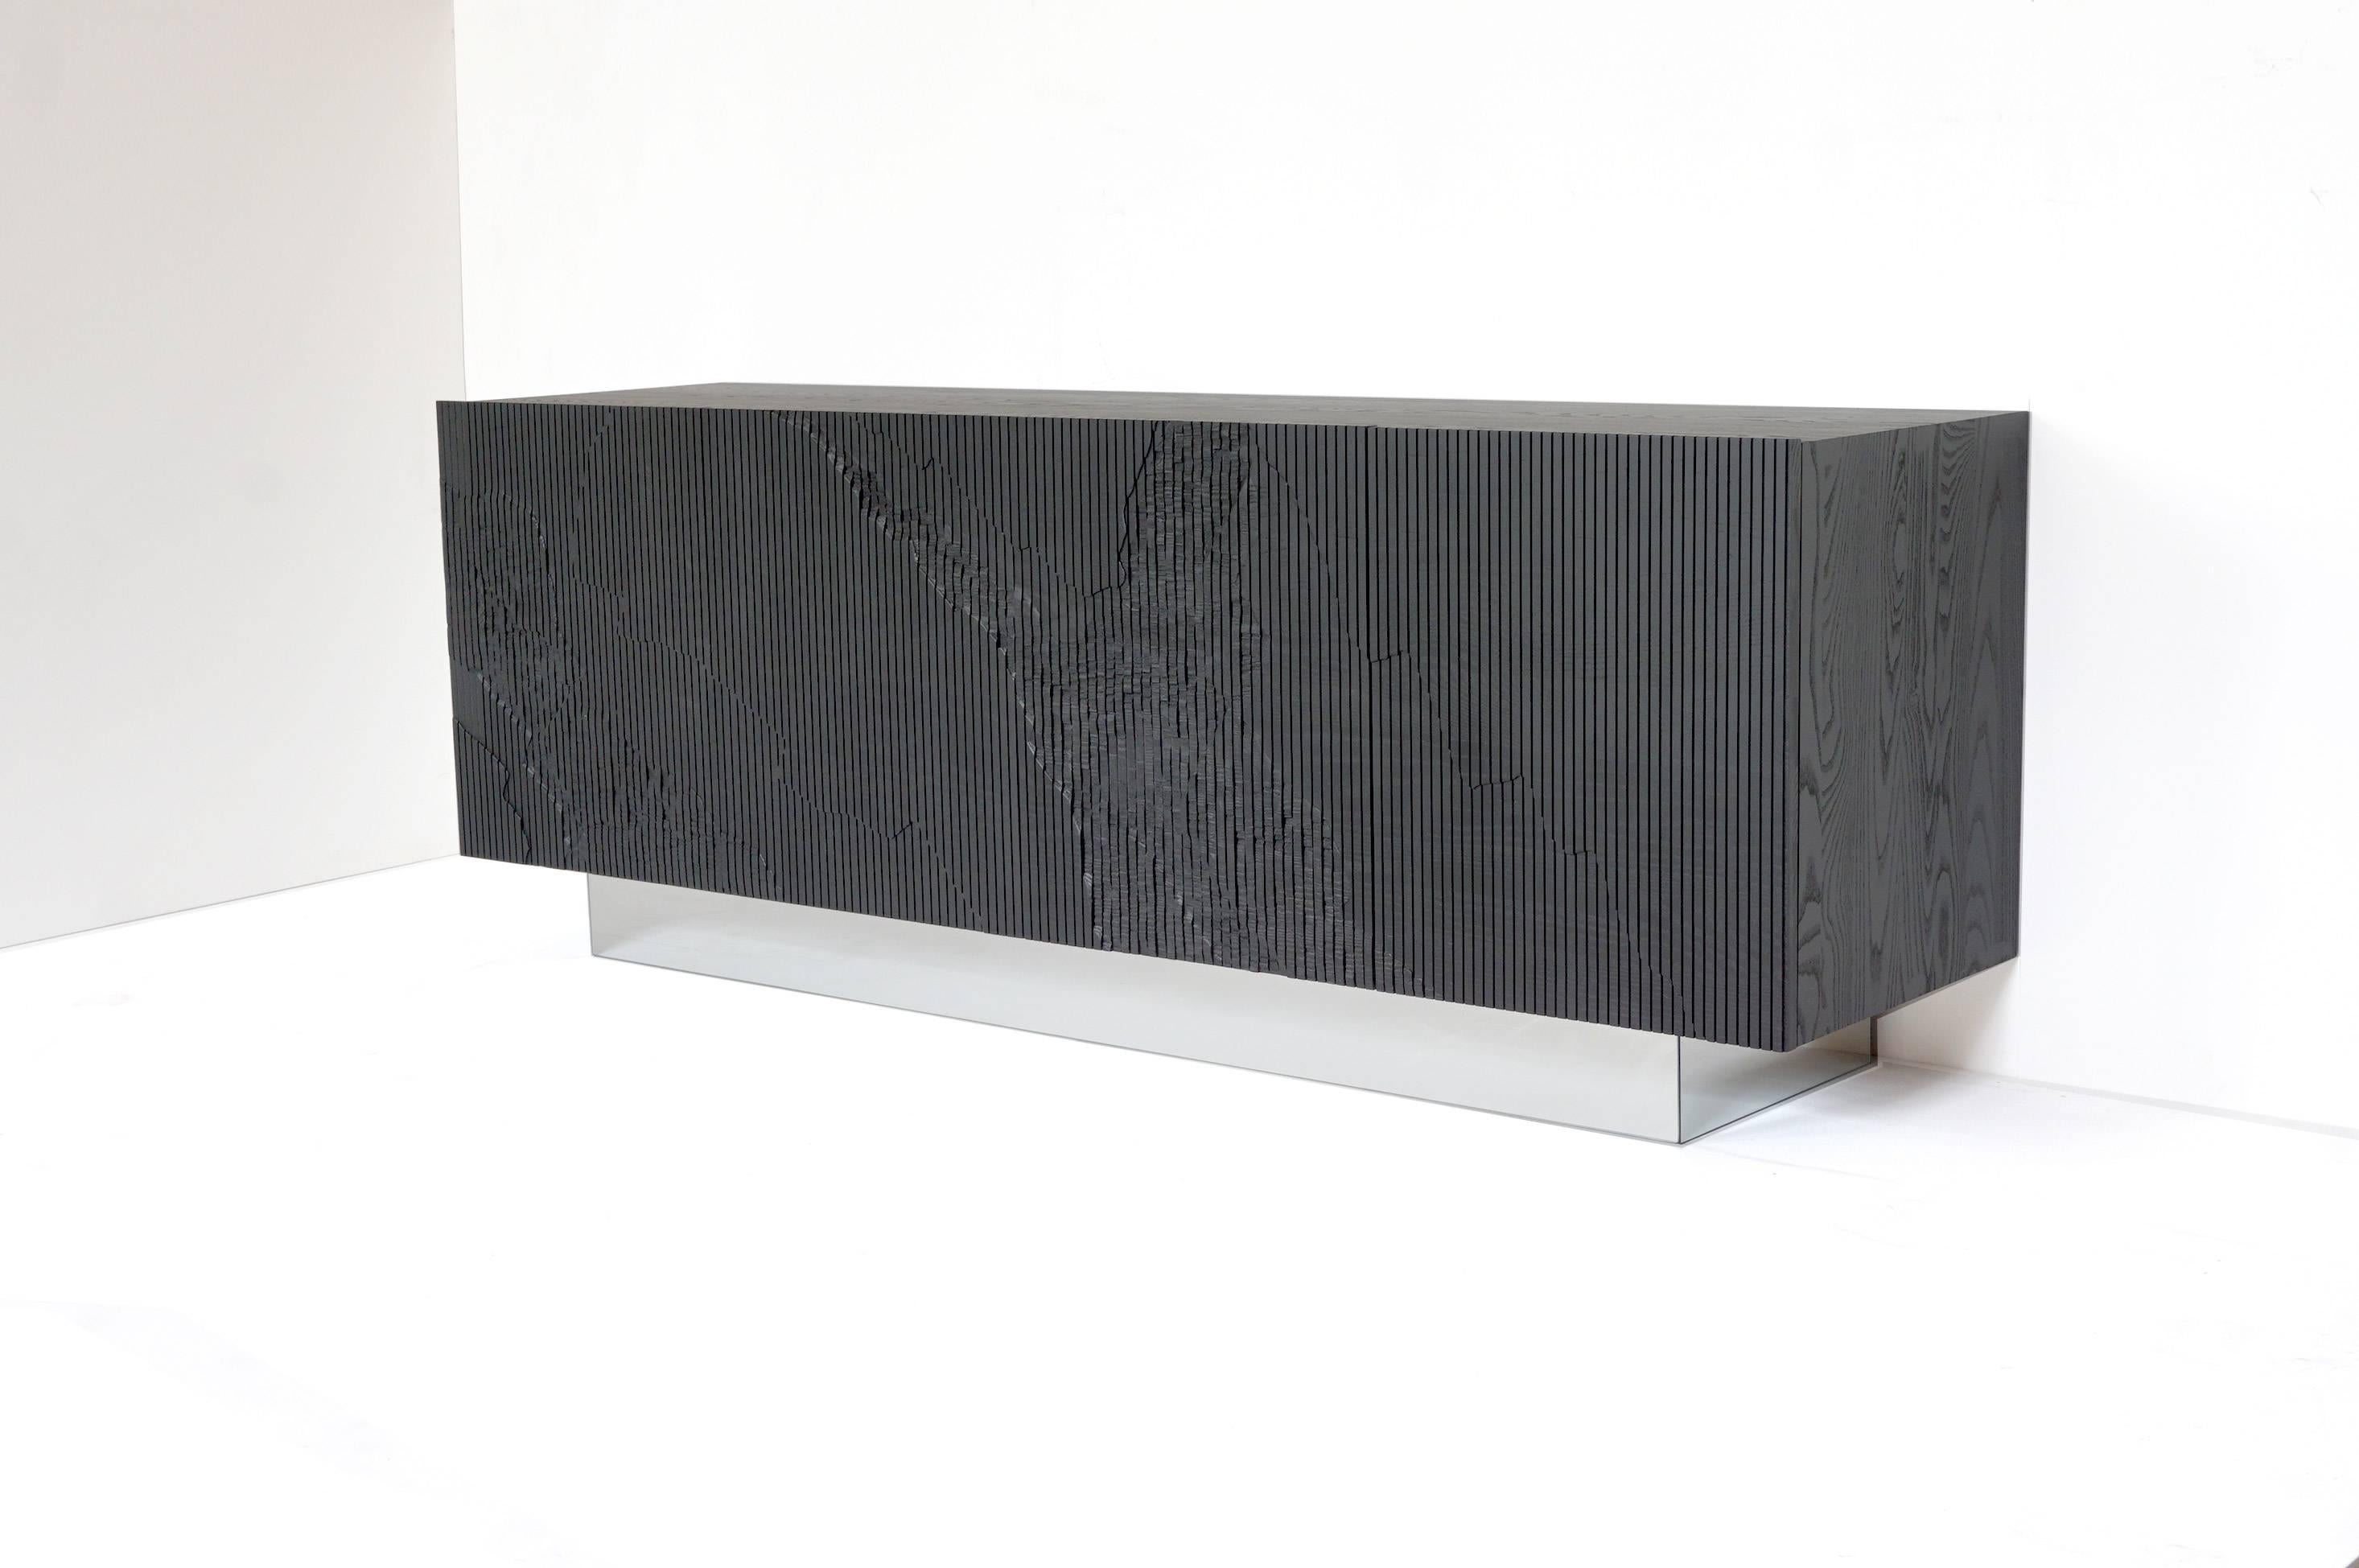 Both monumental and subtle, the Shale Credenza brings the intricacies of nature’s geology indoors. The wood doors are scored vertically across the grain, and details of a cliff’s facade, mapped out by Simon Johns, are carved into them replicating